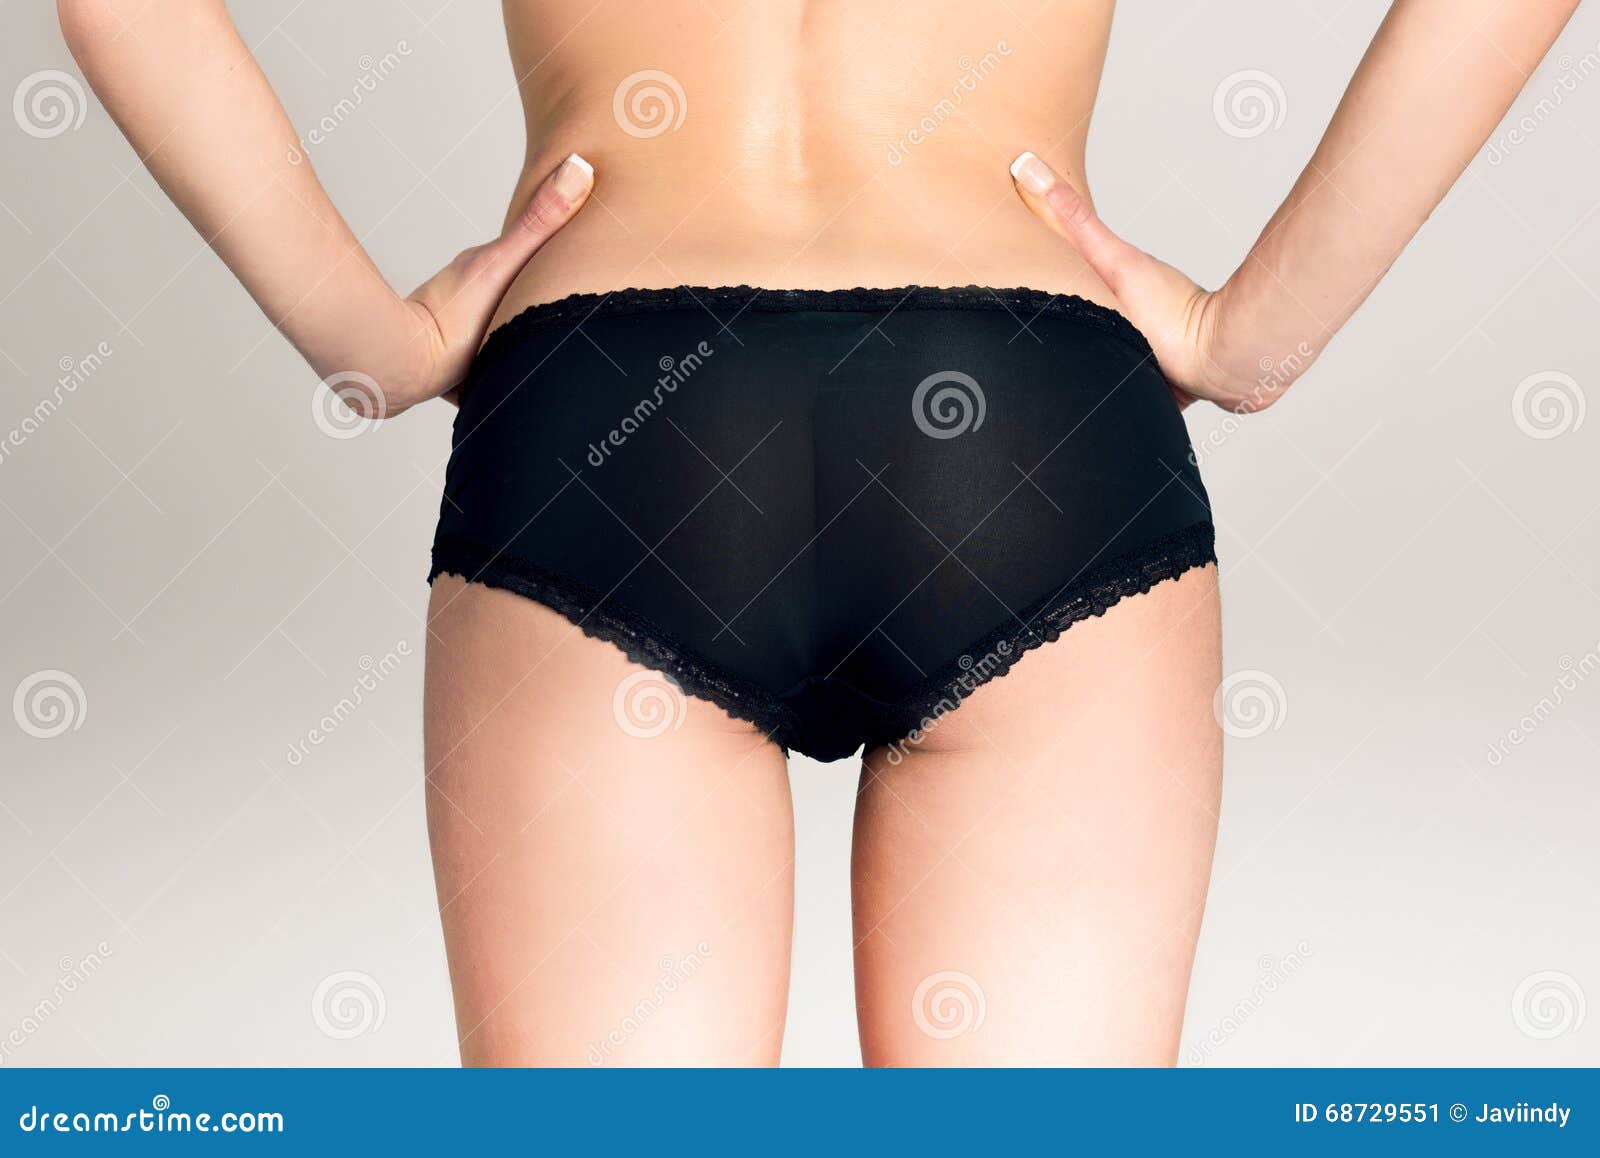 Female Wearing Black Panties Against White Background Stock Image - Image  of woman, healthy: 68729551